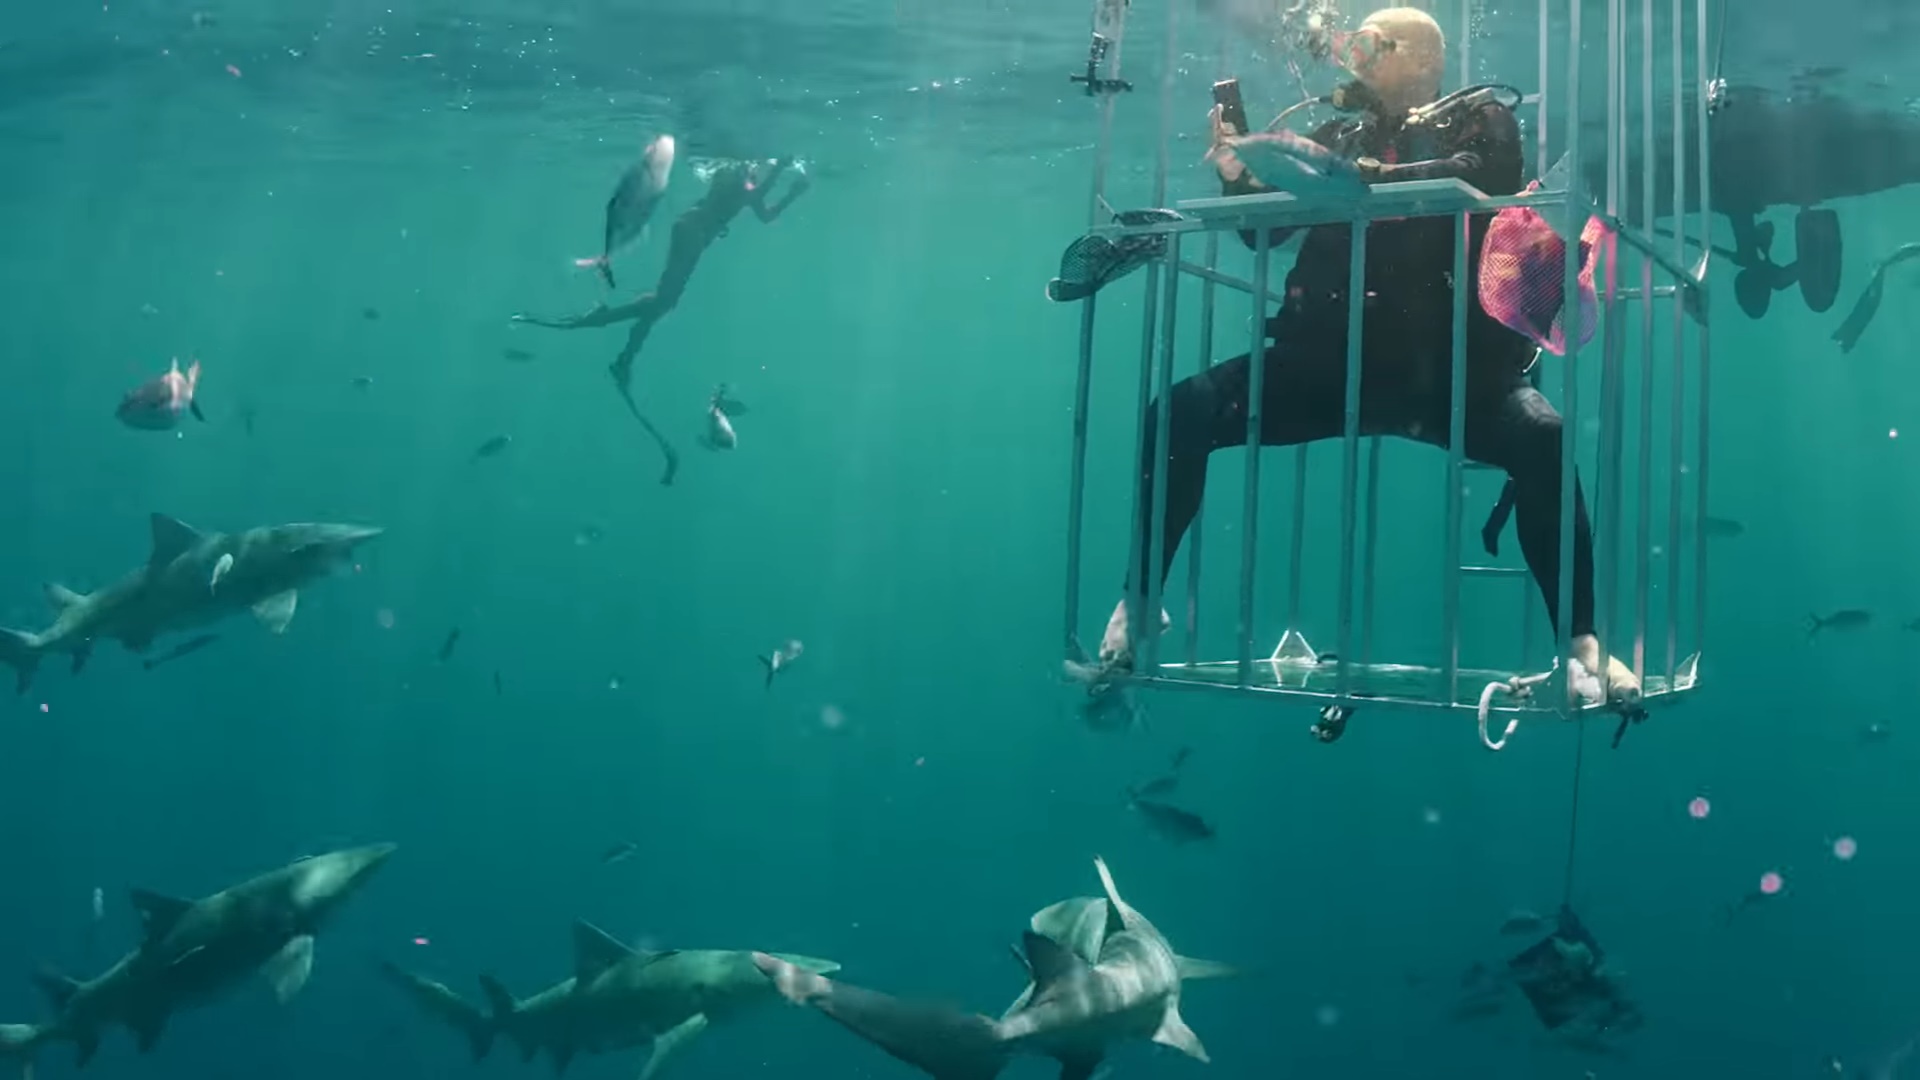 Galaxy S8 gets unboxed underwater and surrounded by sharks